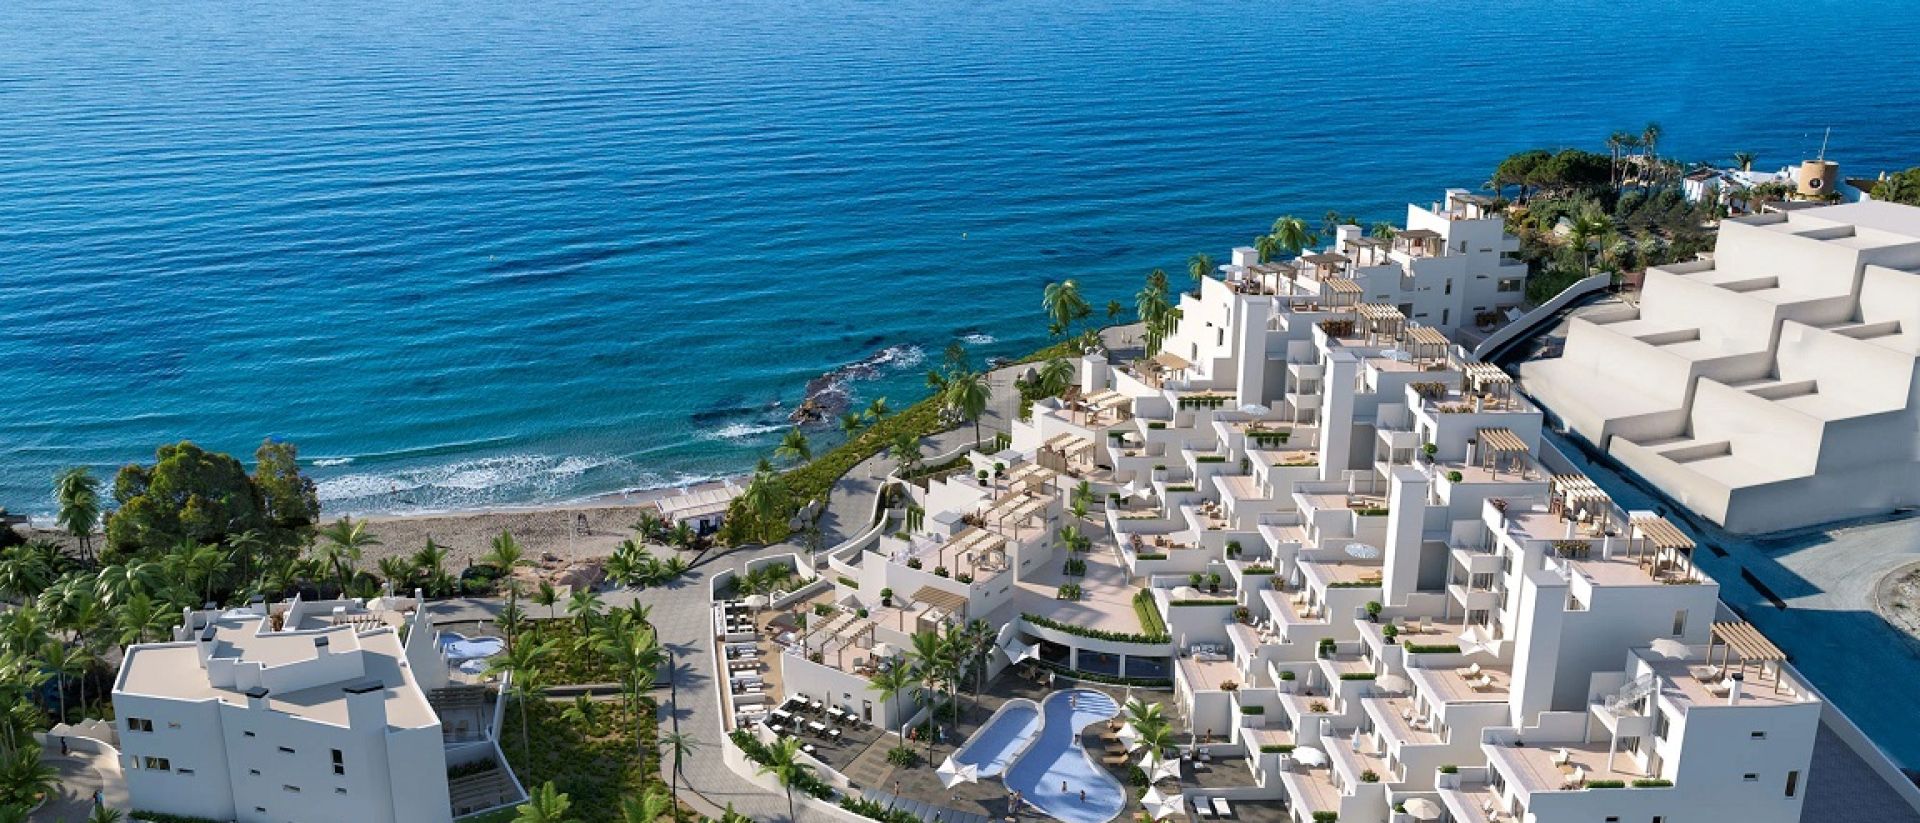 Dormio Resort Costa Blanca, a space to enjoy with the family